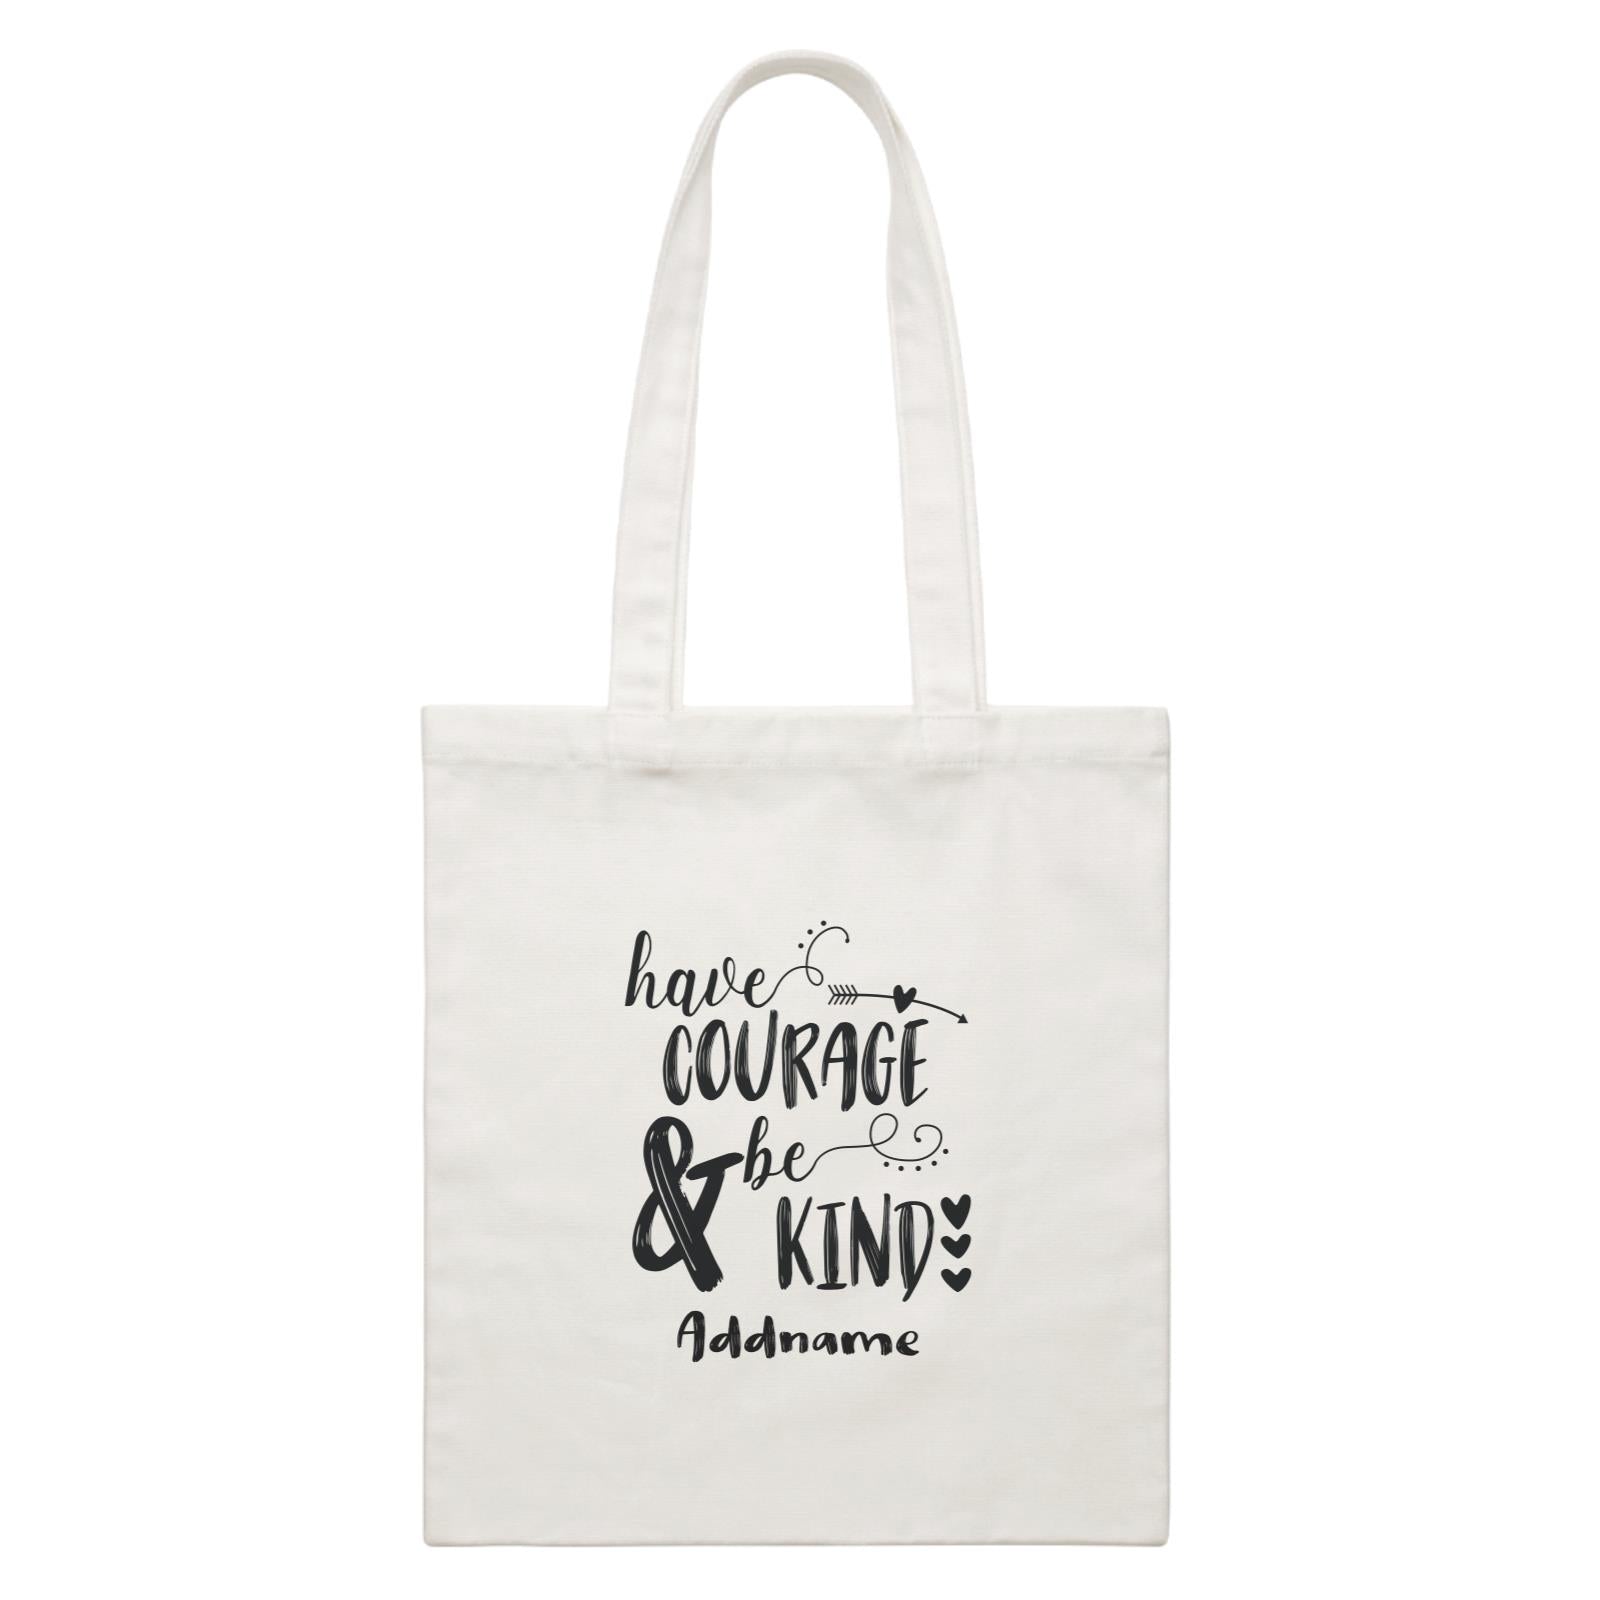 Inspiration Quotes Have Courage And Be Kind Addname White Canvas Bag